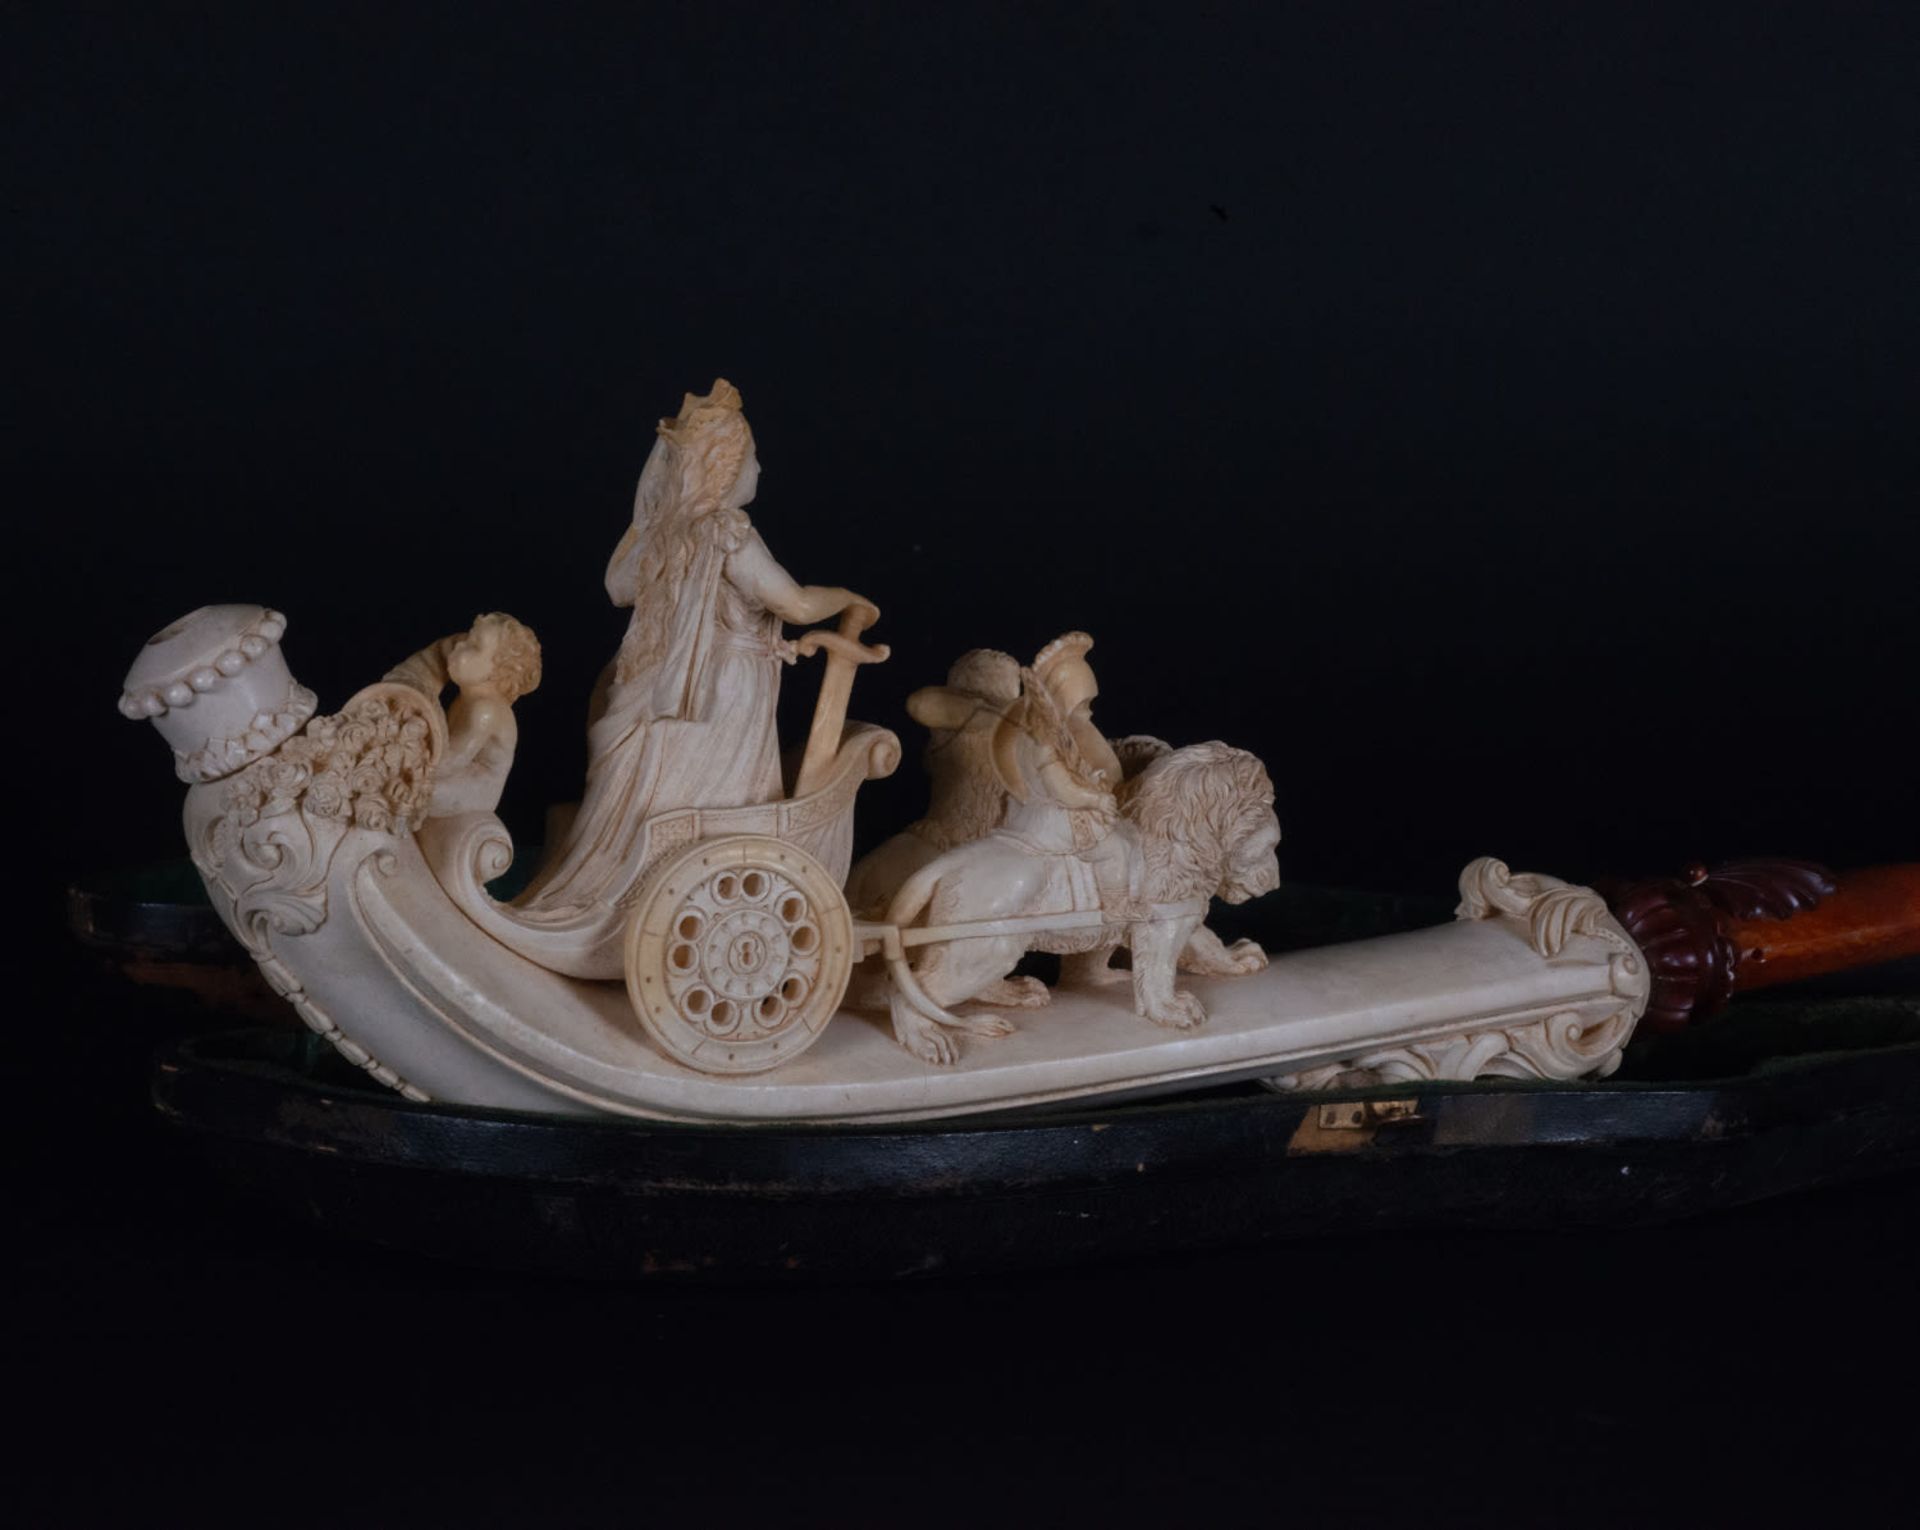 Rare and Exceptional Sea Foam Pipe and Amber Representing the Goddess Cibeles, 19th century